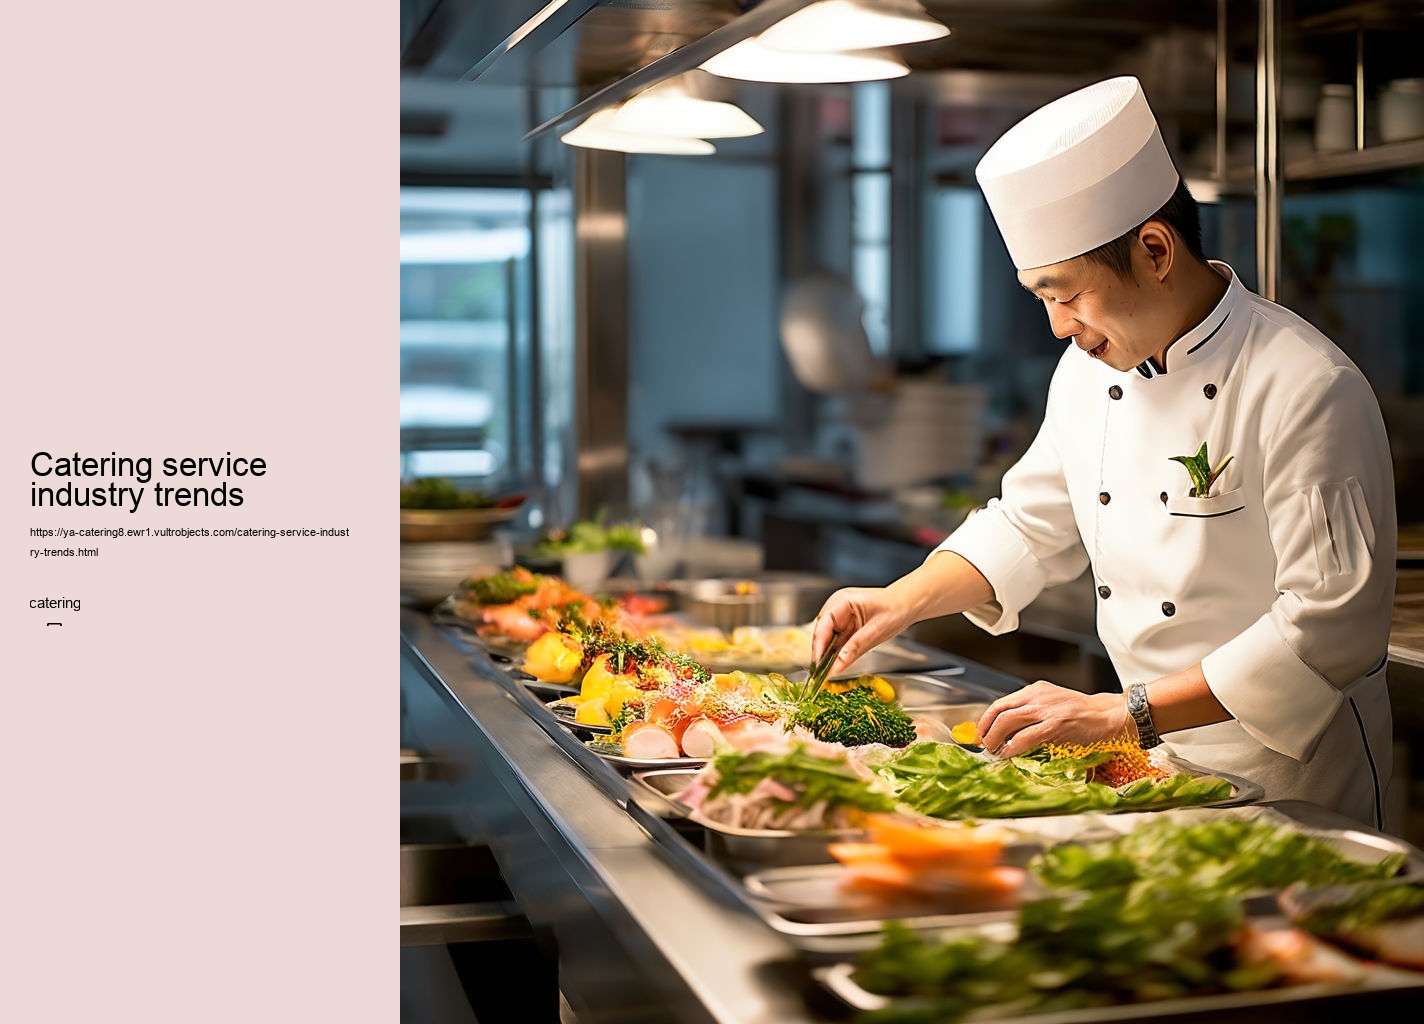 Catering service industry trends